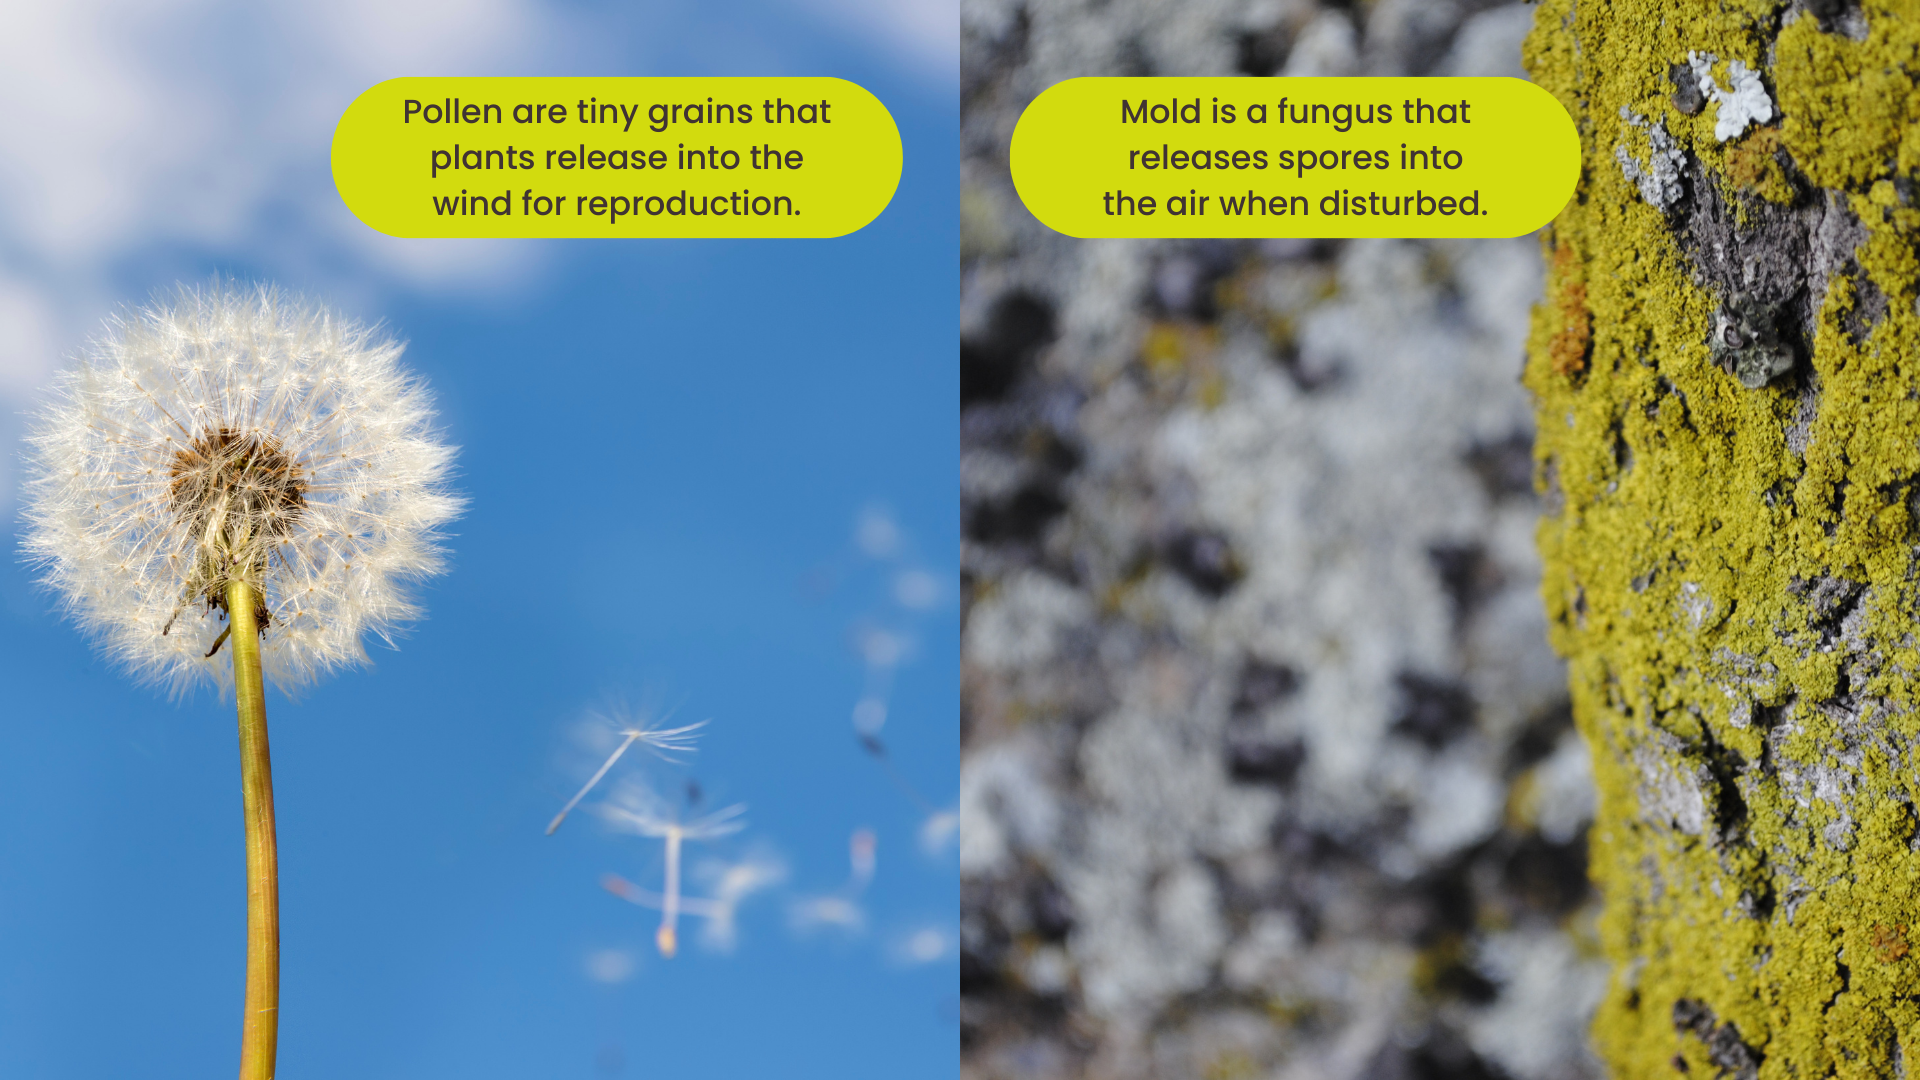 Split image and description of pollen and mold.